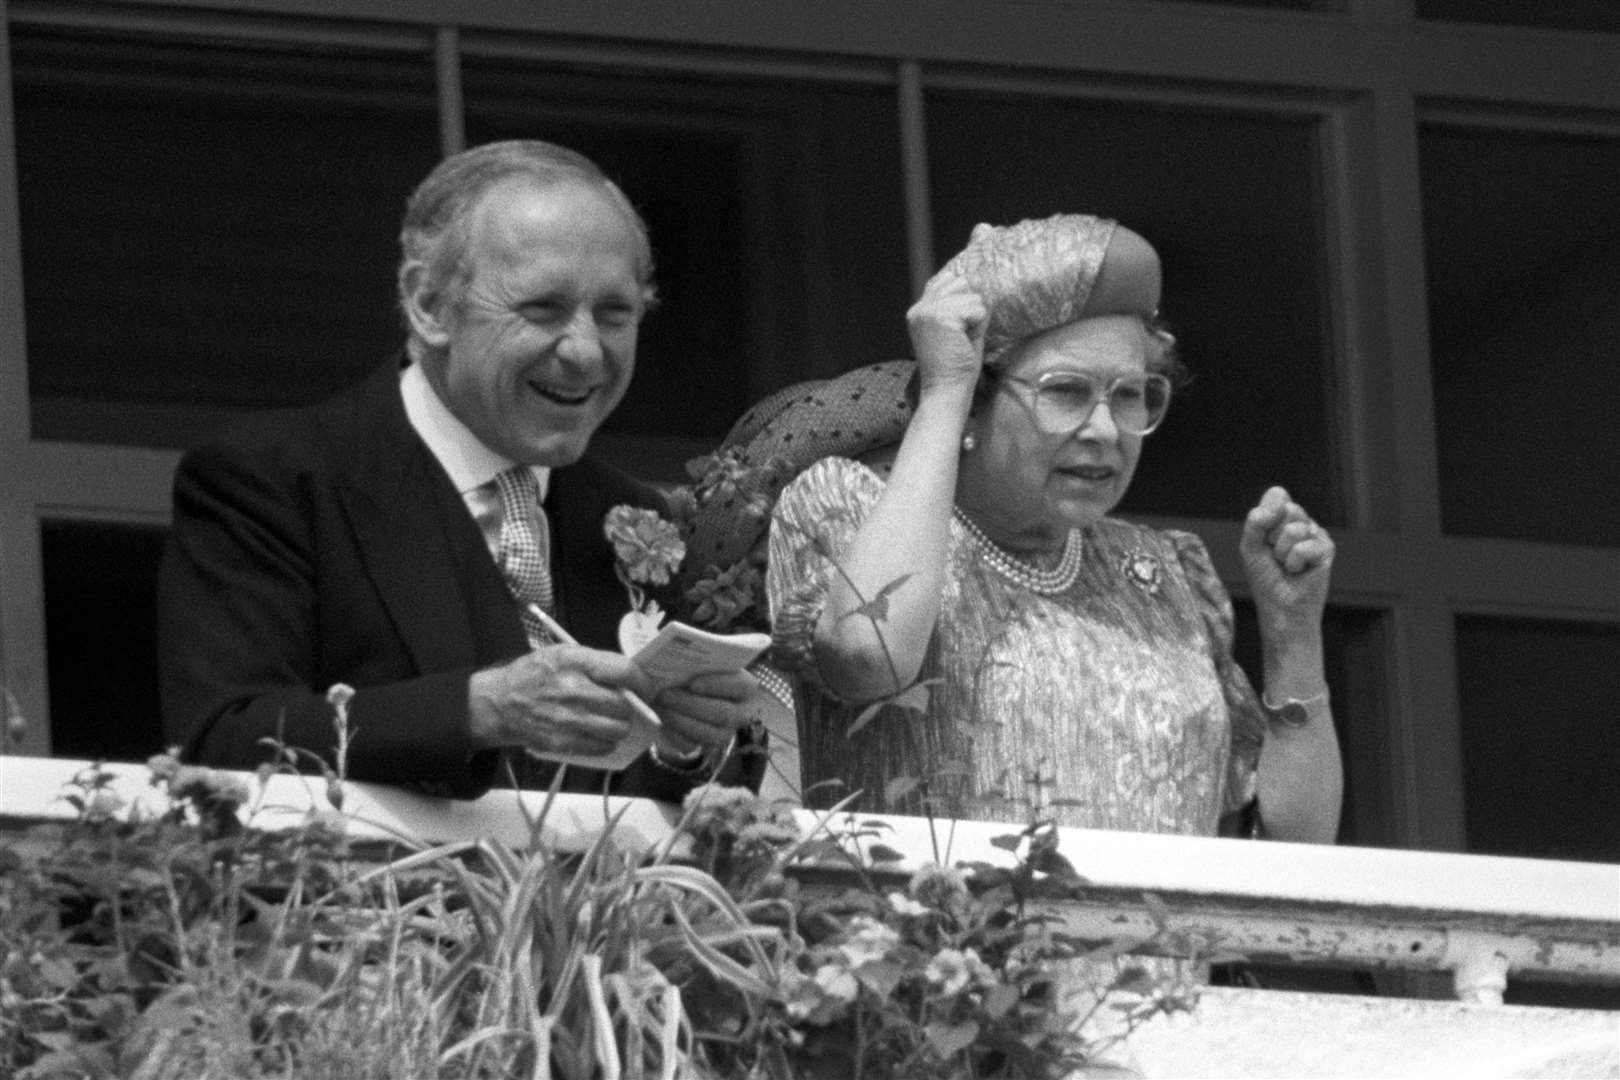 Cheering on her horse with private secretary Sir William Heseltine from the royal box at Epsom in 1989 (Adam Butler/PA)